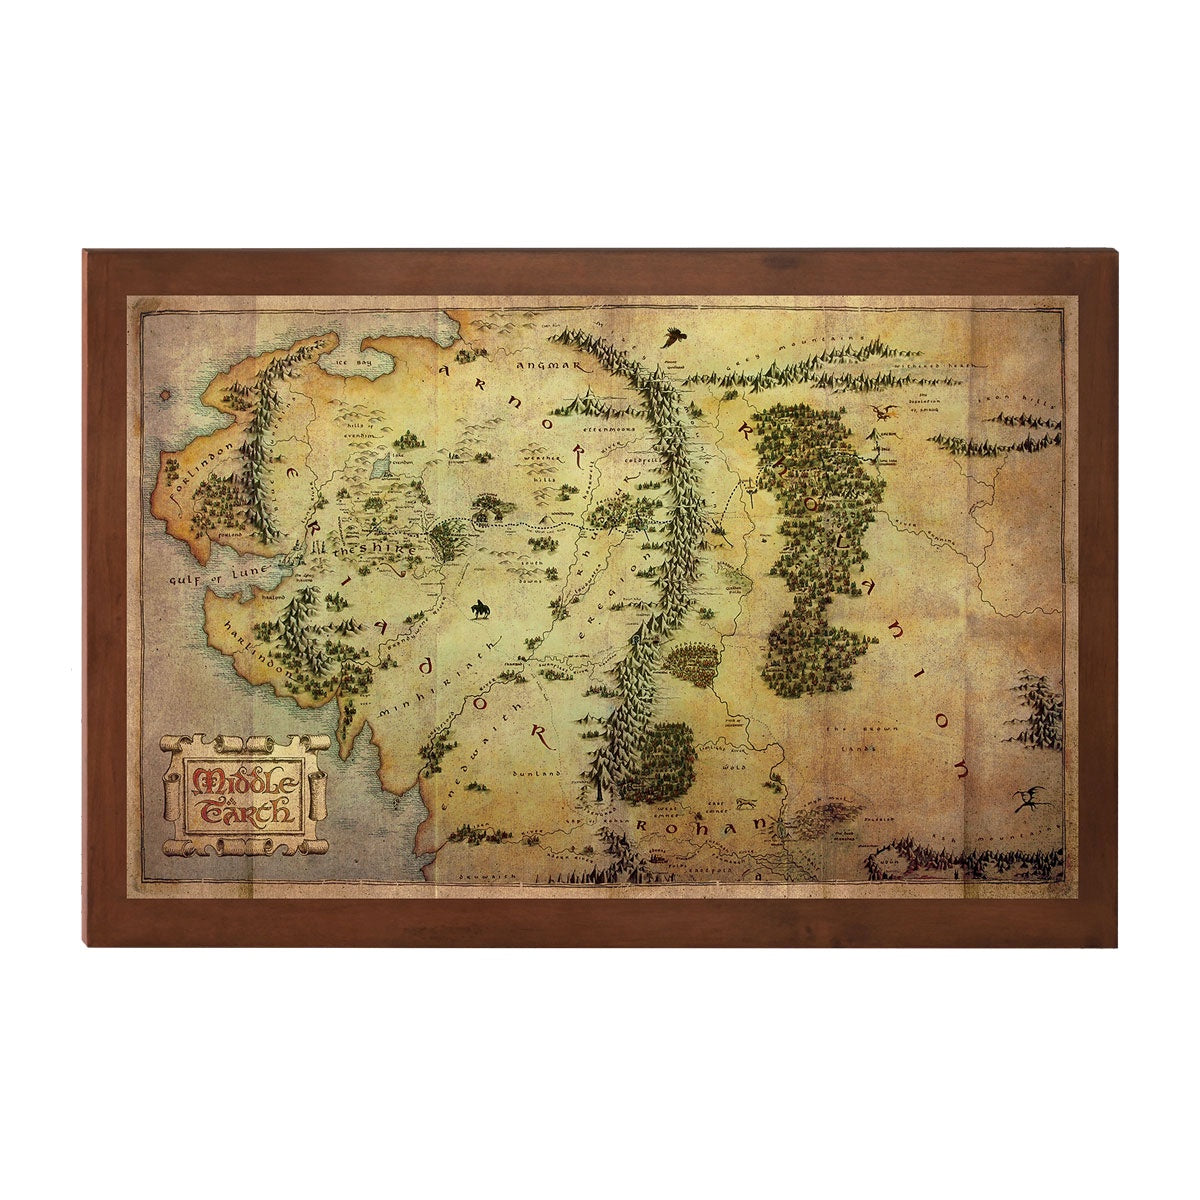 The Map of Middle Earth